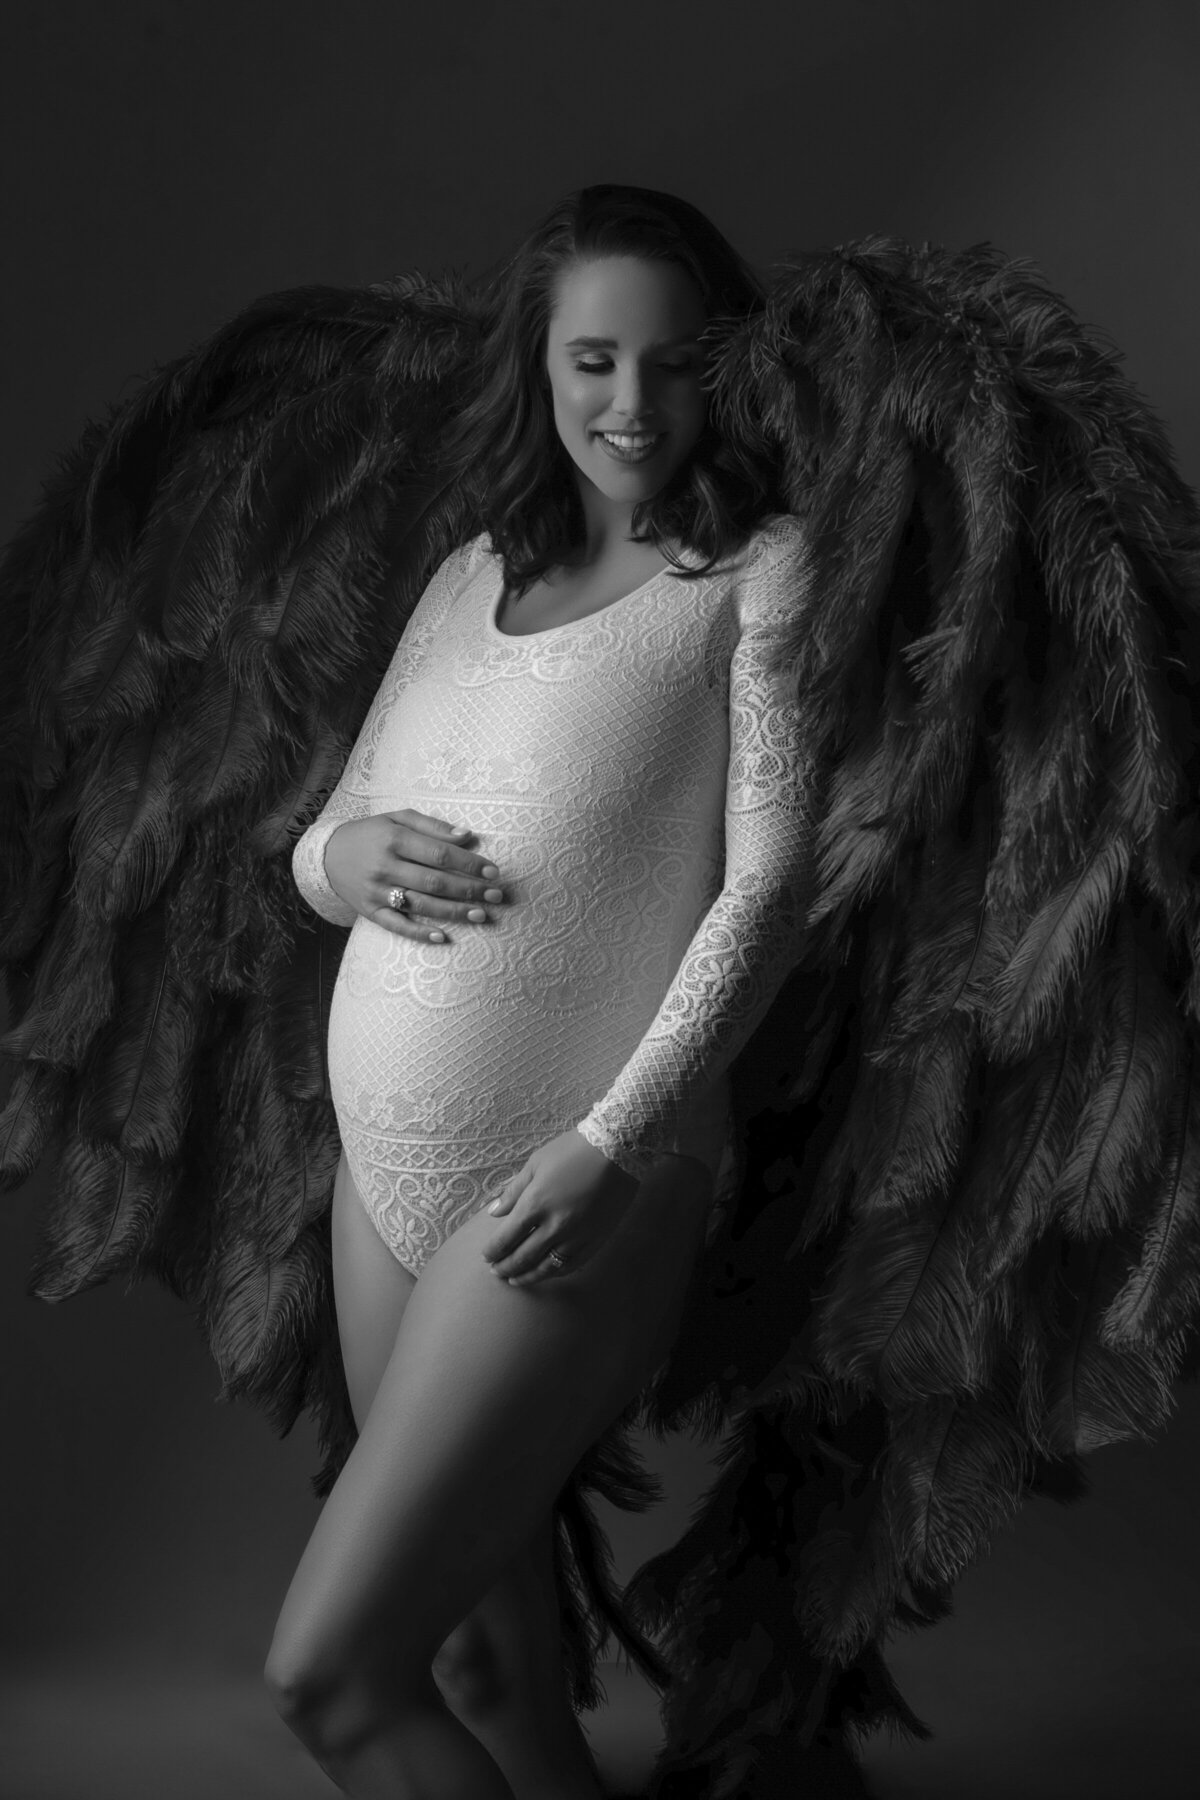 In BW Raleigh NC Maternity Portrait Photographer 9